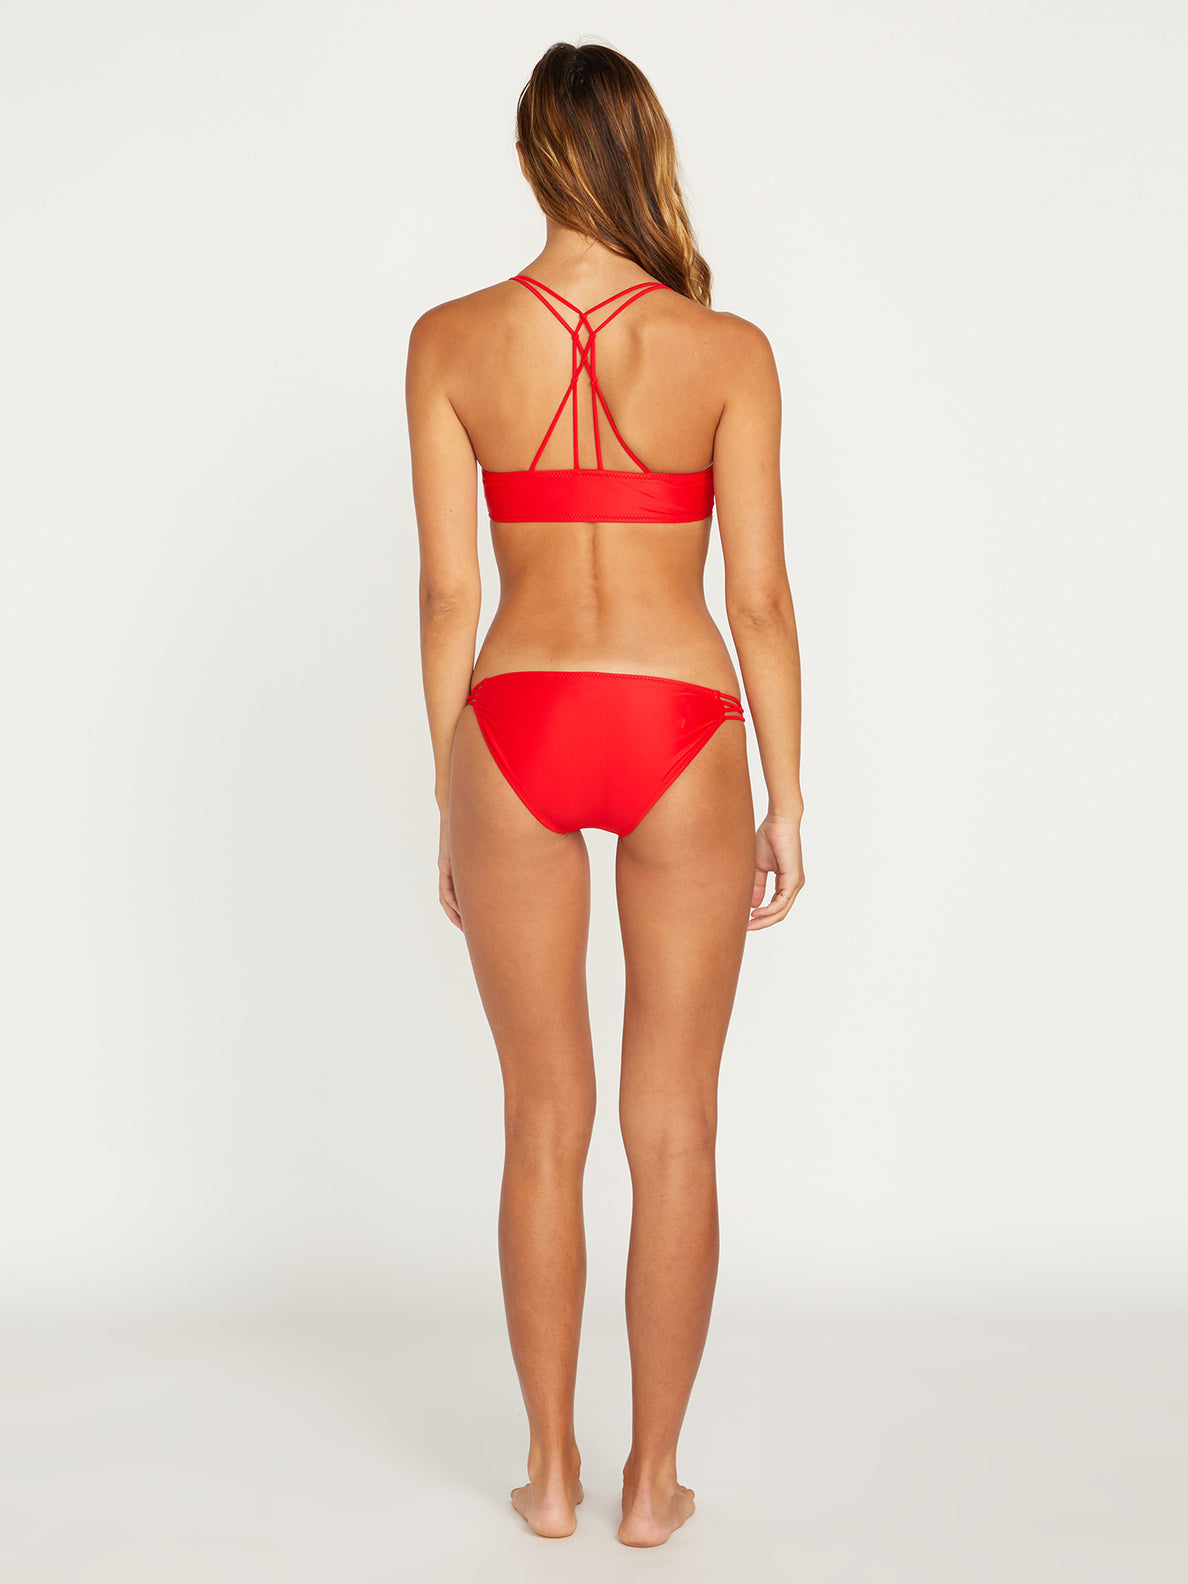 Simply Solid Full Bikini Bottoms - Candy Apple